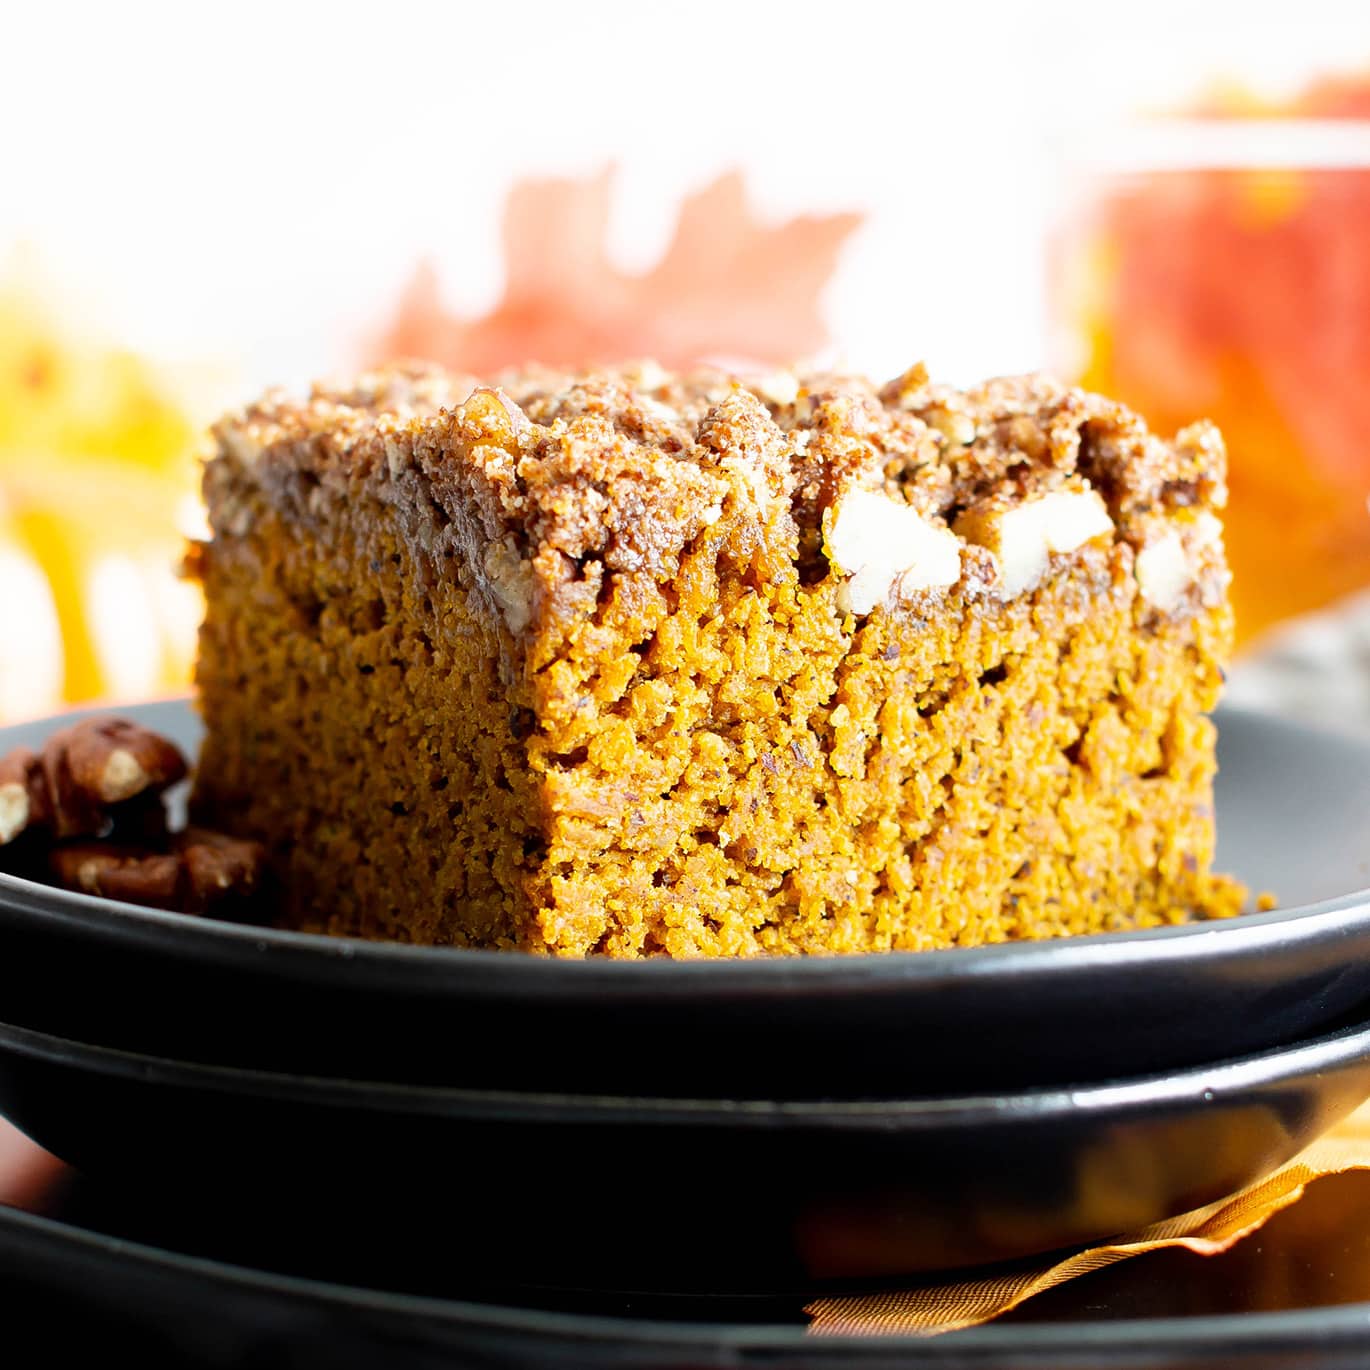 Easy Gluten Free Vegan Pumpkin Coffee Cake Recipe (V, GF): a thick layer of moist pumpkin coffee cake with a cinnamon sweet, buttery-rich topping. Made with healthy, whole ingredients. #Vegan #GlutenFree #CoffeeCake #Pumpkin #VeganBaking #CleanEating #Fall #PumpkinSpice | Recipe at BeamingBaker.com